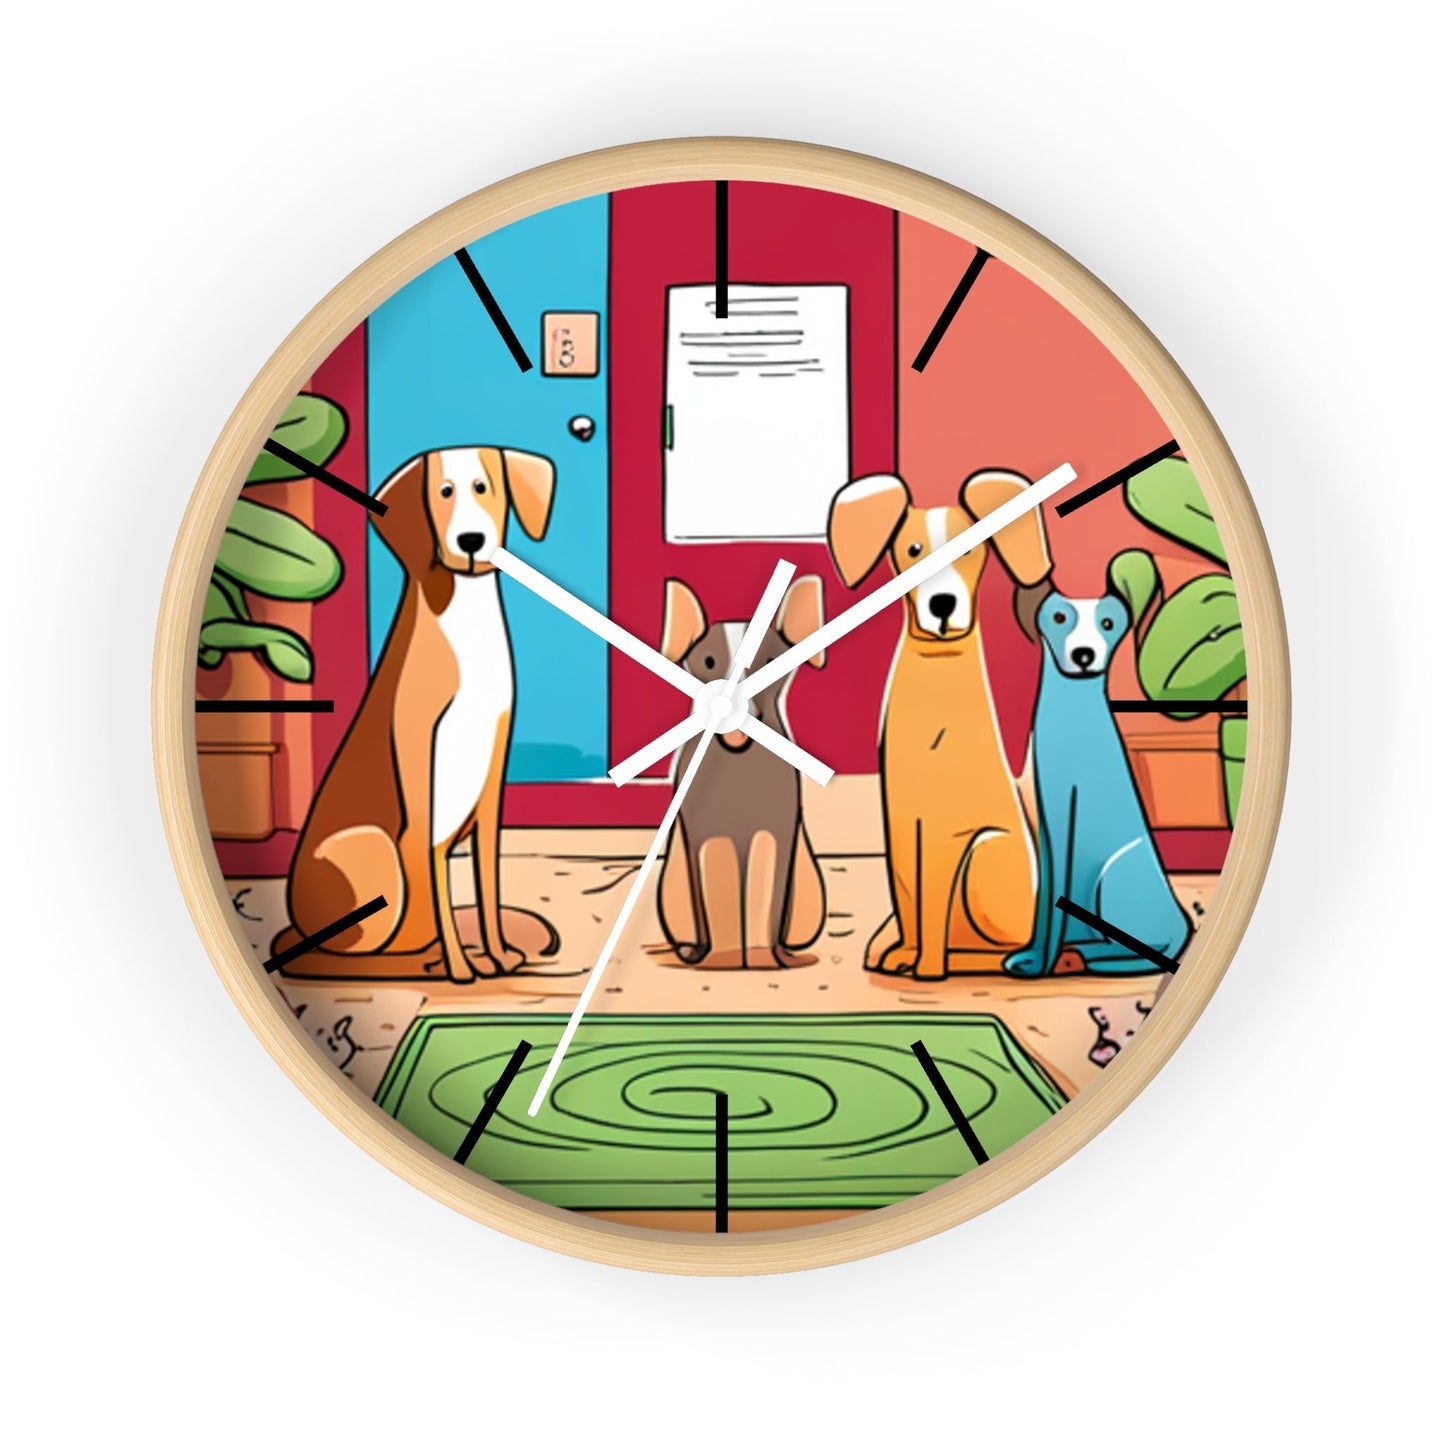 Wall Clock Featuring A Family of Illustrated Dogs - Lizard Vigilante